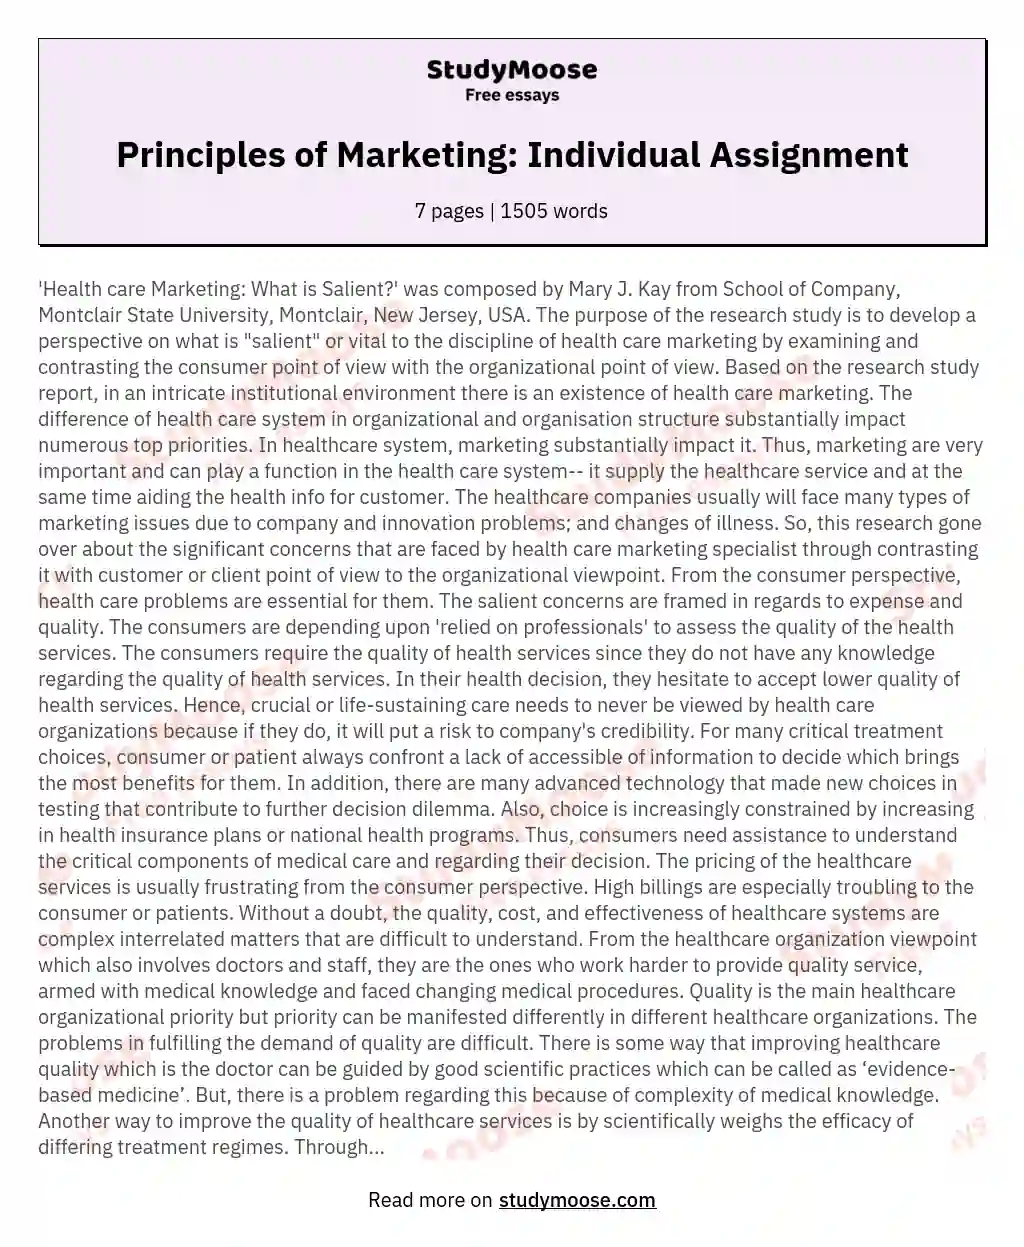 principles of marketing individual assignment